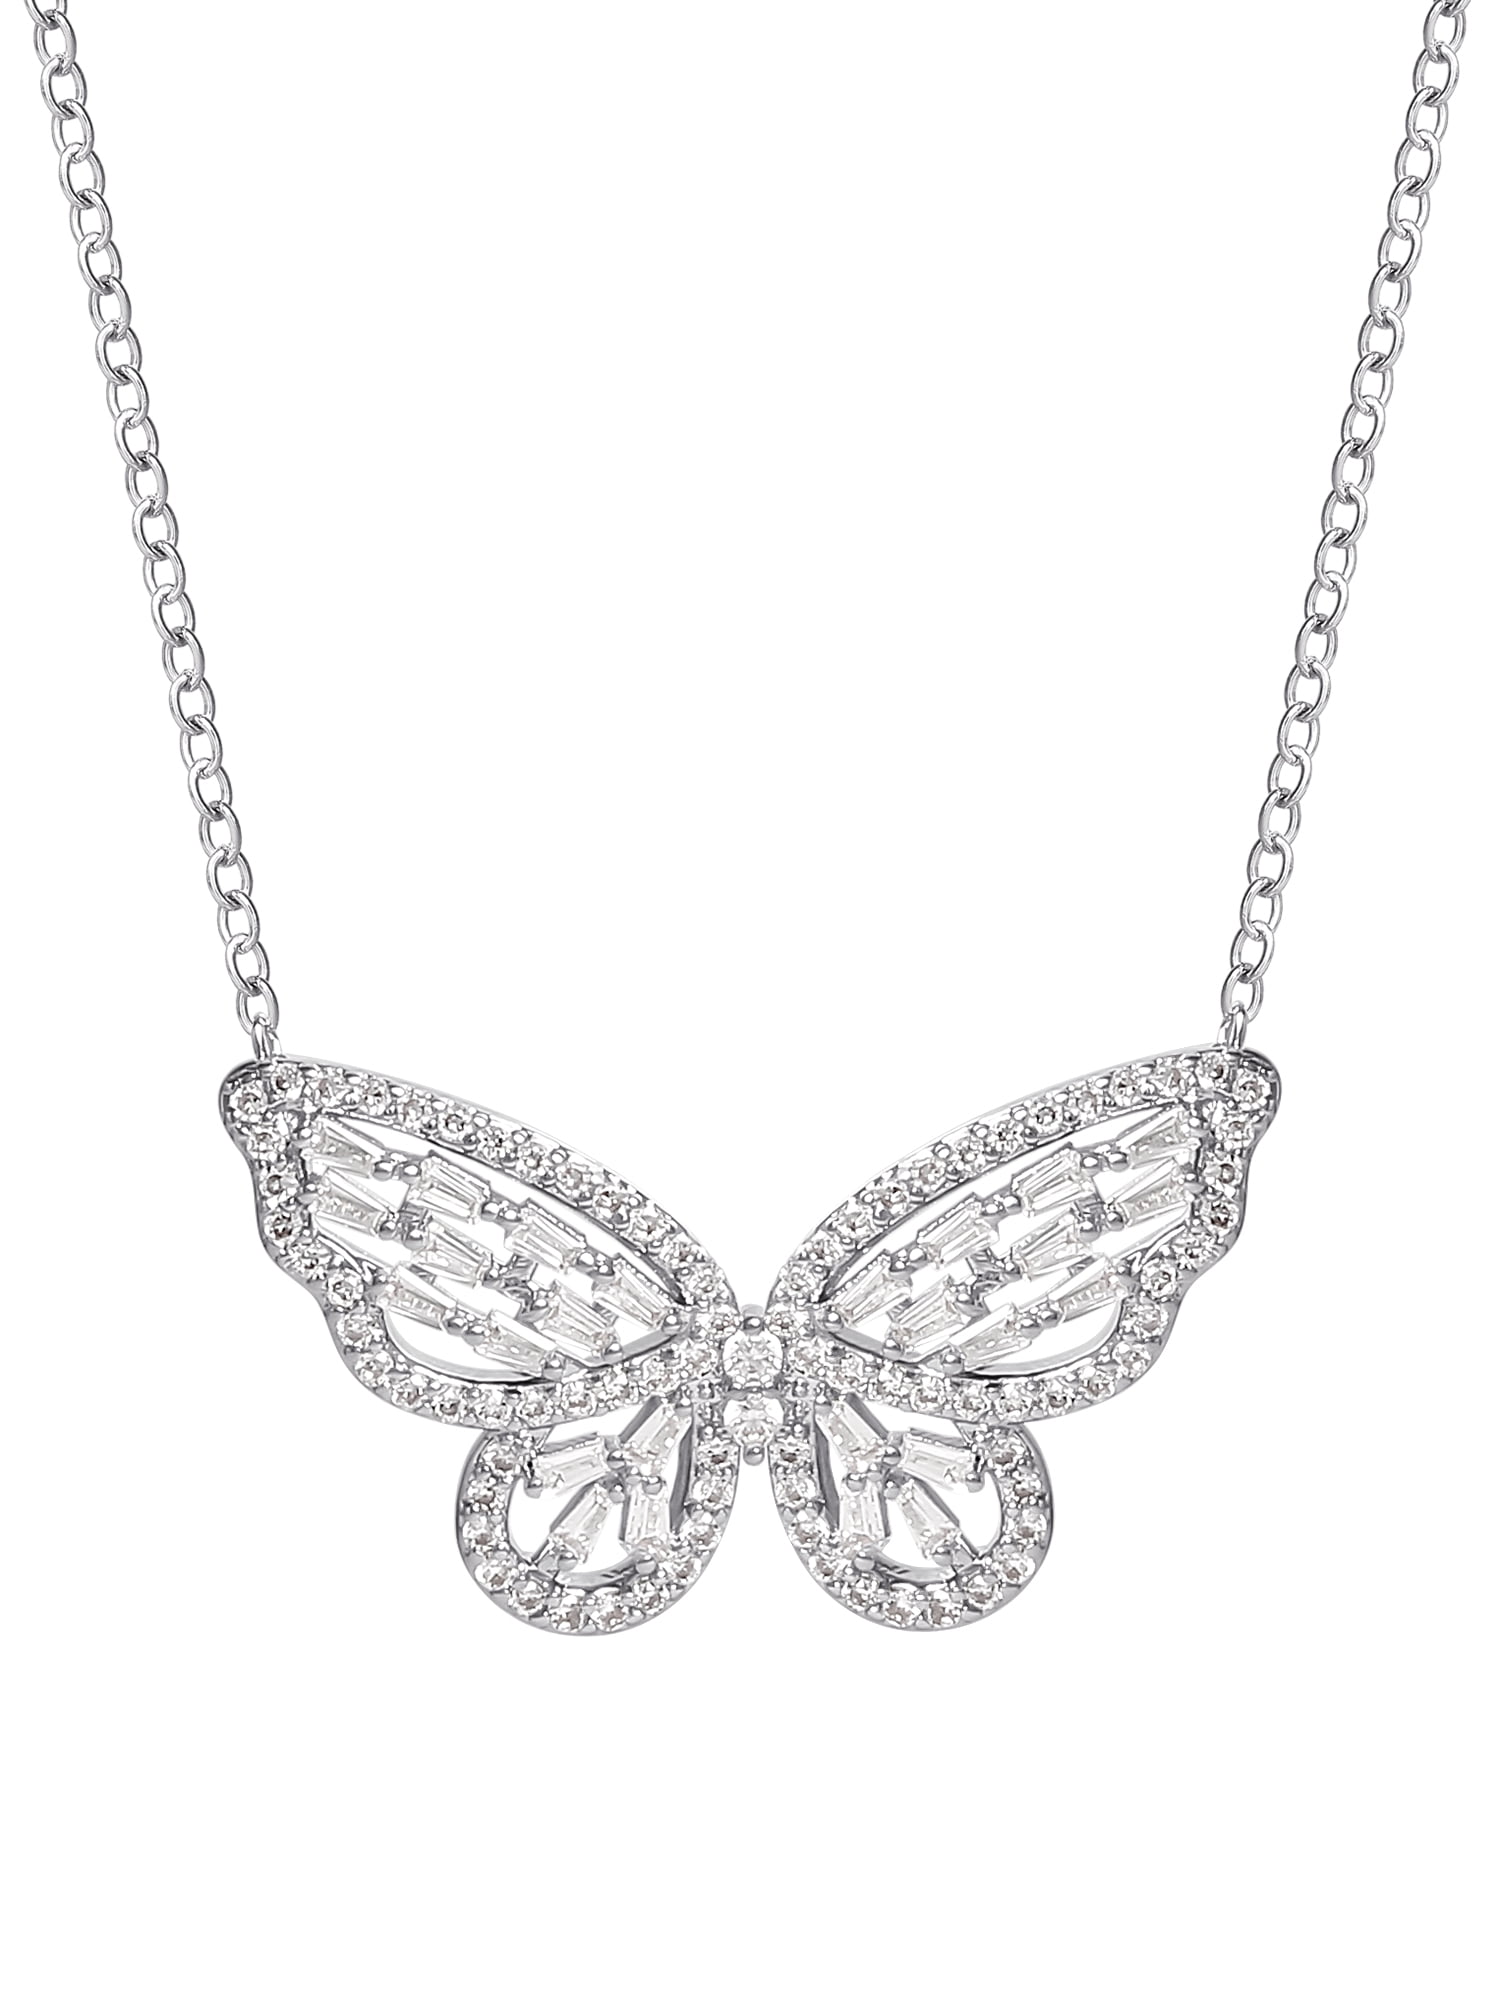 Auzeuner Women Butterfly Charm Cubic Zirconia 925 Sterling Silver Pendant Necklace 18 inch Chain